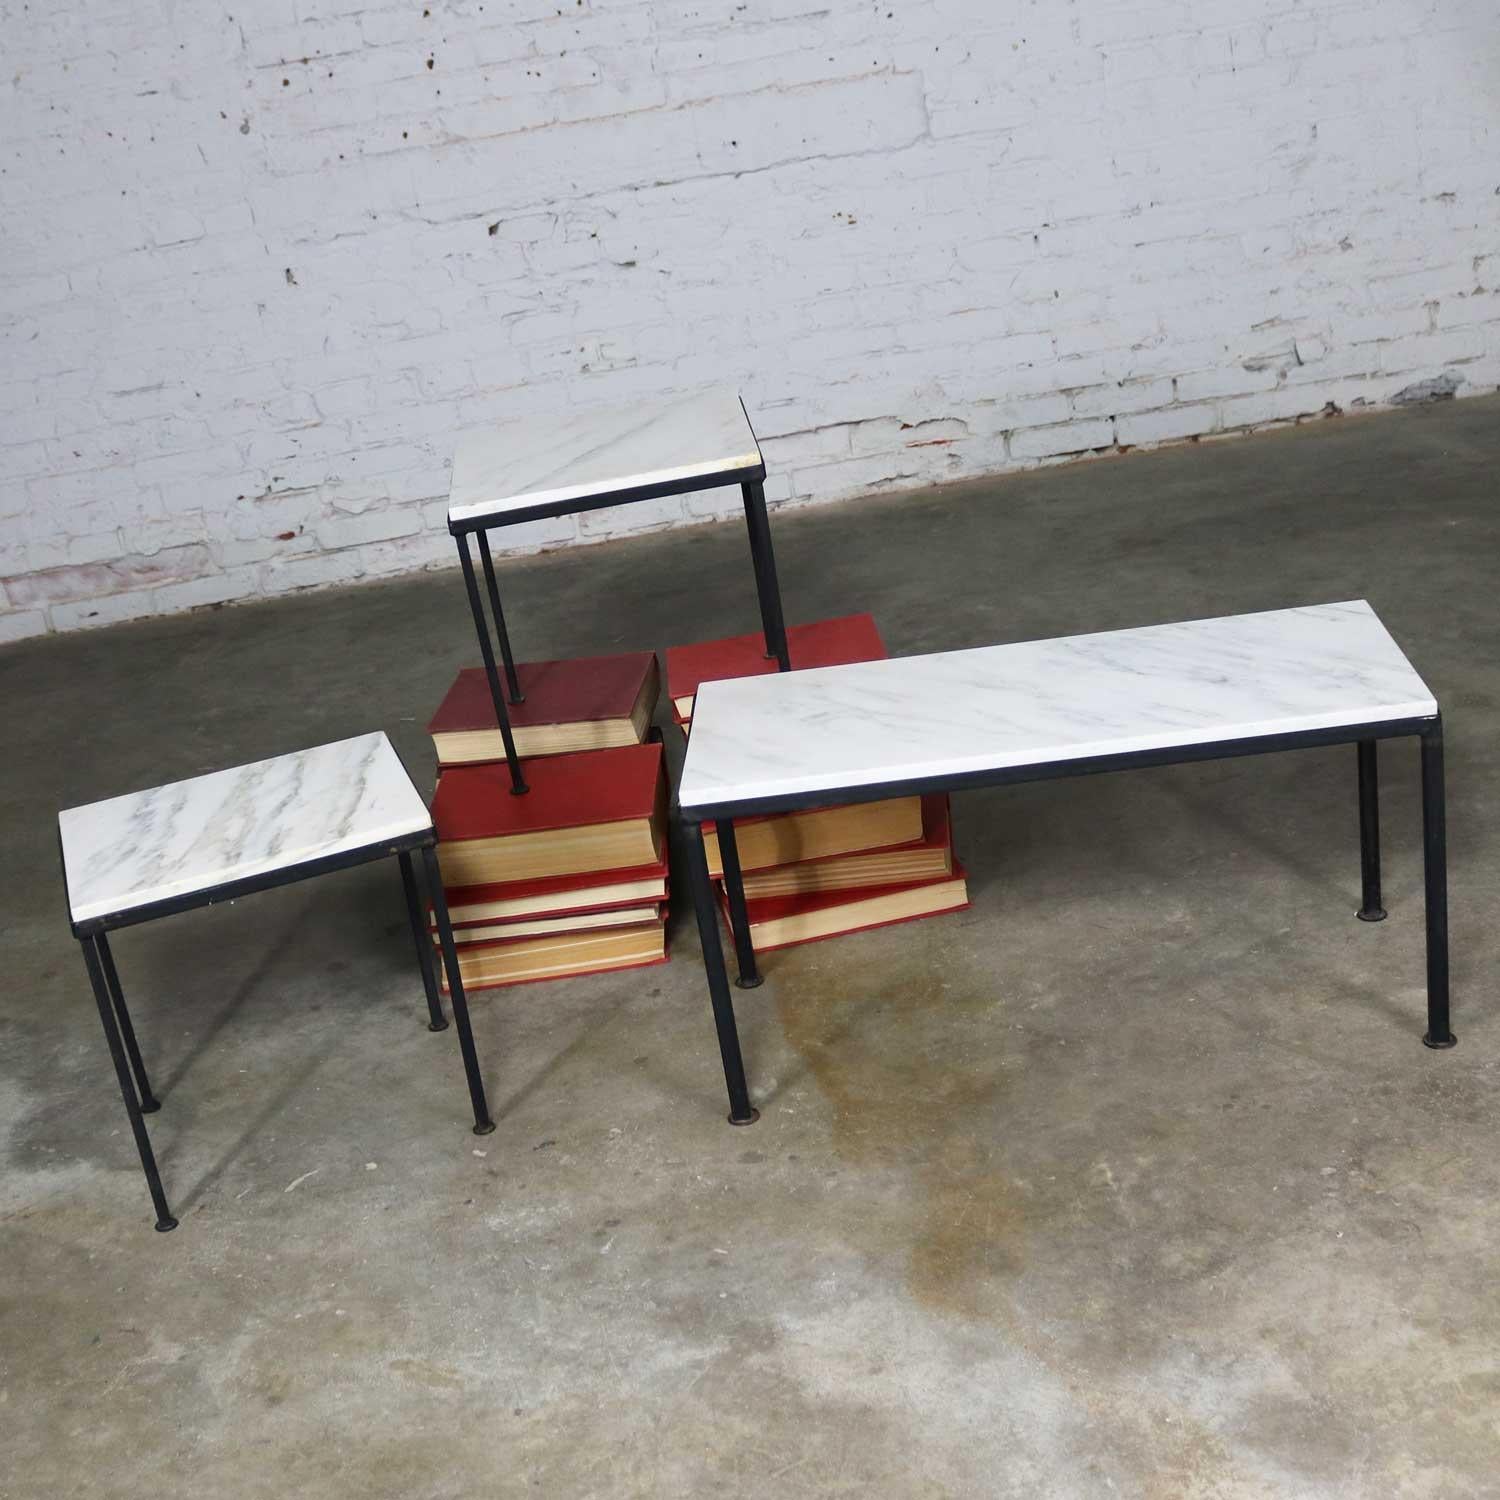 If you are looking for little tables for a small sitting area…….look no further. Whether it is indoors or out! This trio is comprised of a pair of small side tables and a diminutive rectangular coffee table. Their frame is black painted iron. The